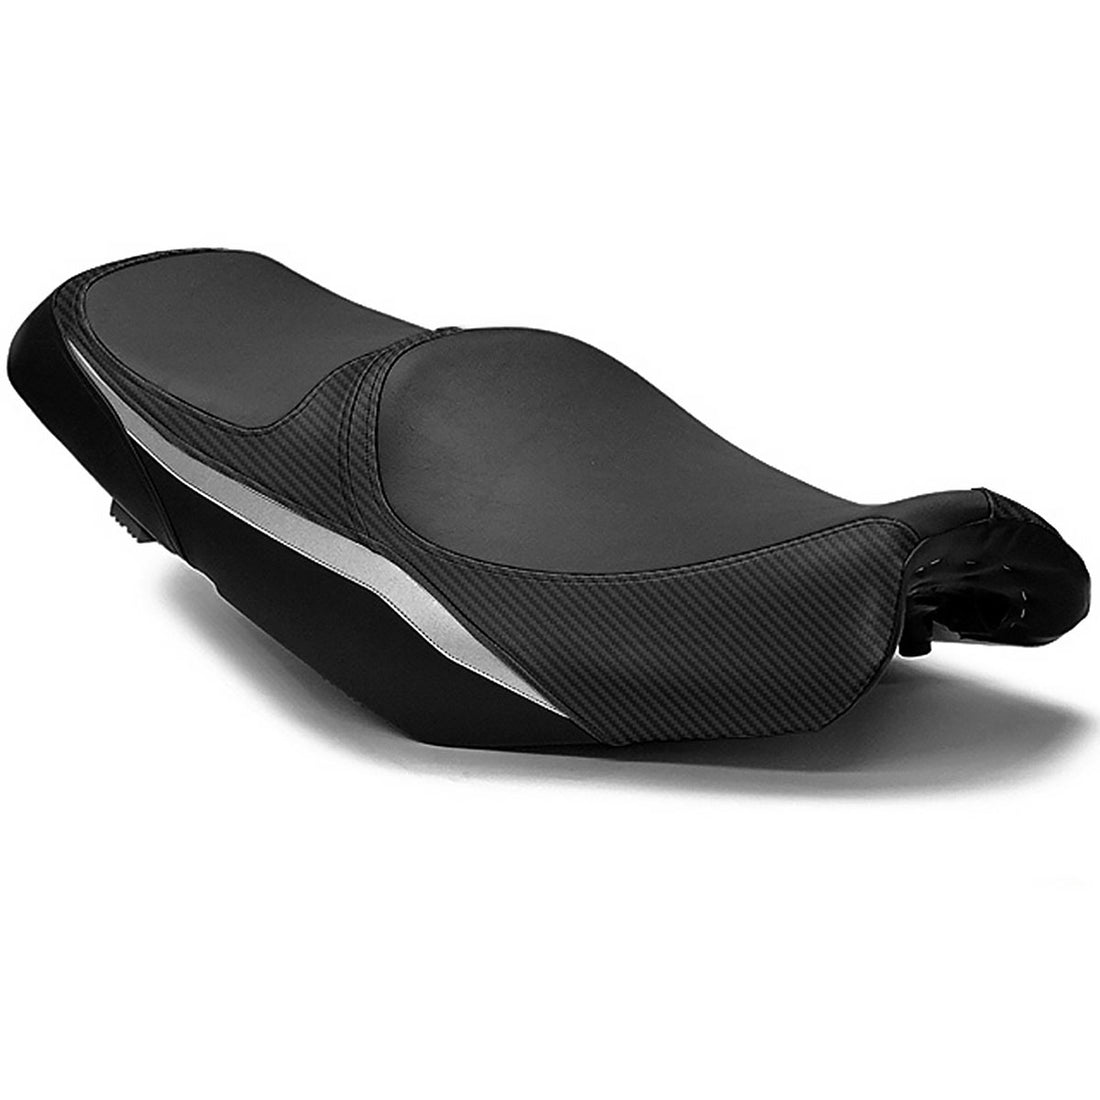 Kawasaki | Concours 14 07-20 | Concours | Rider Seat Cover